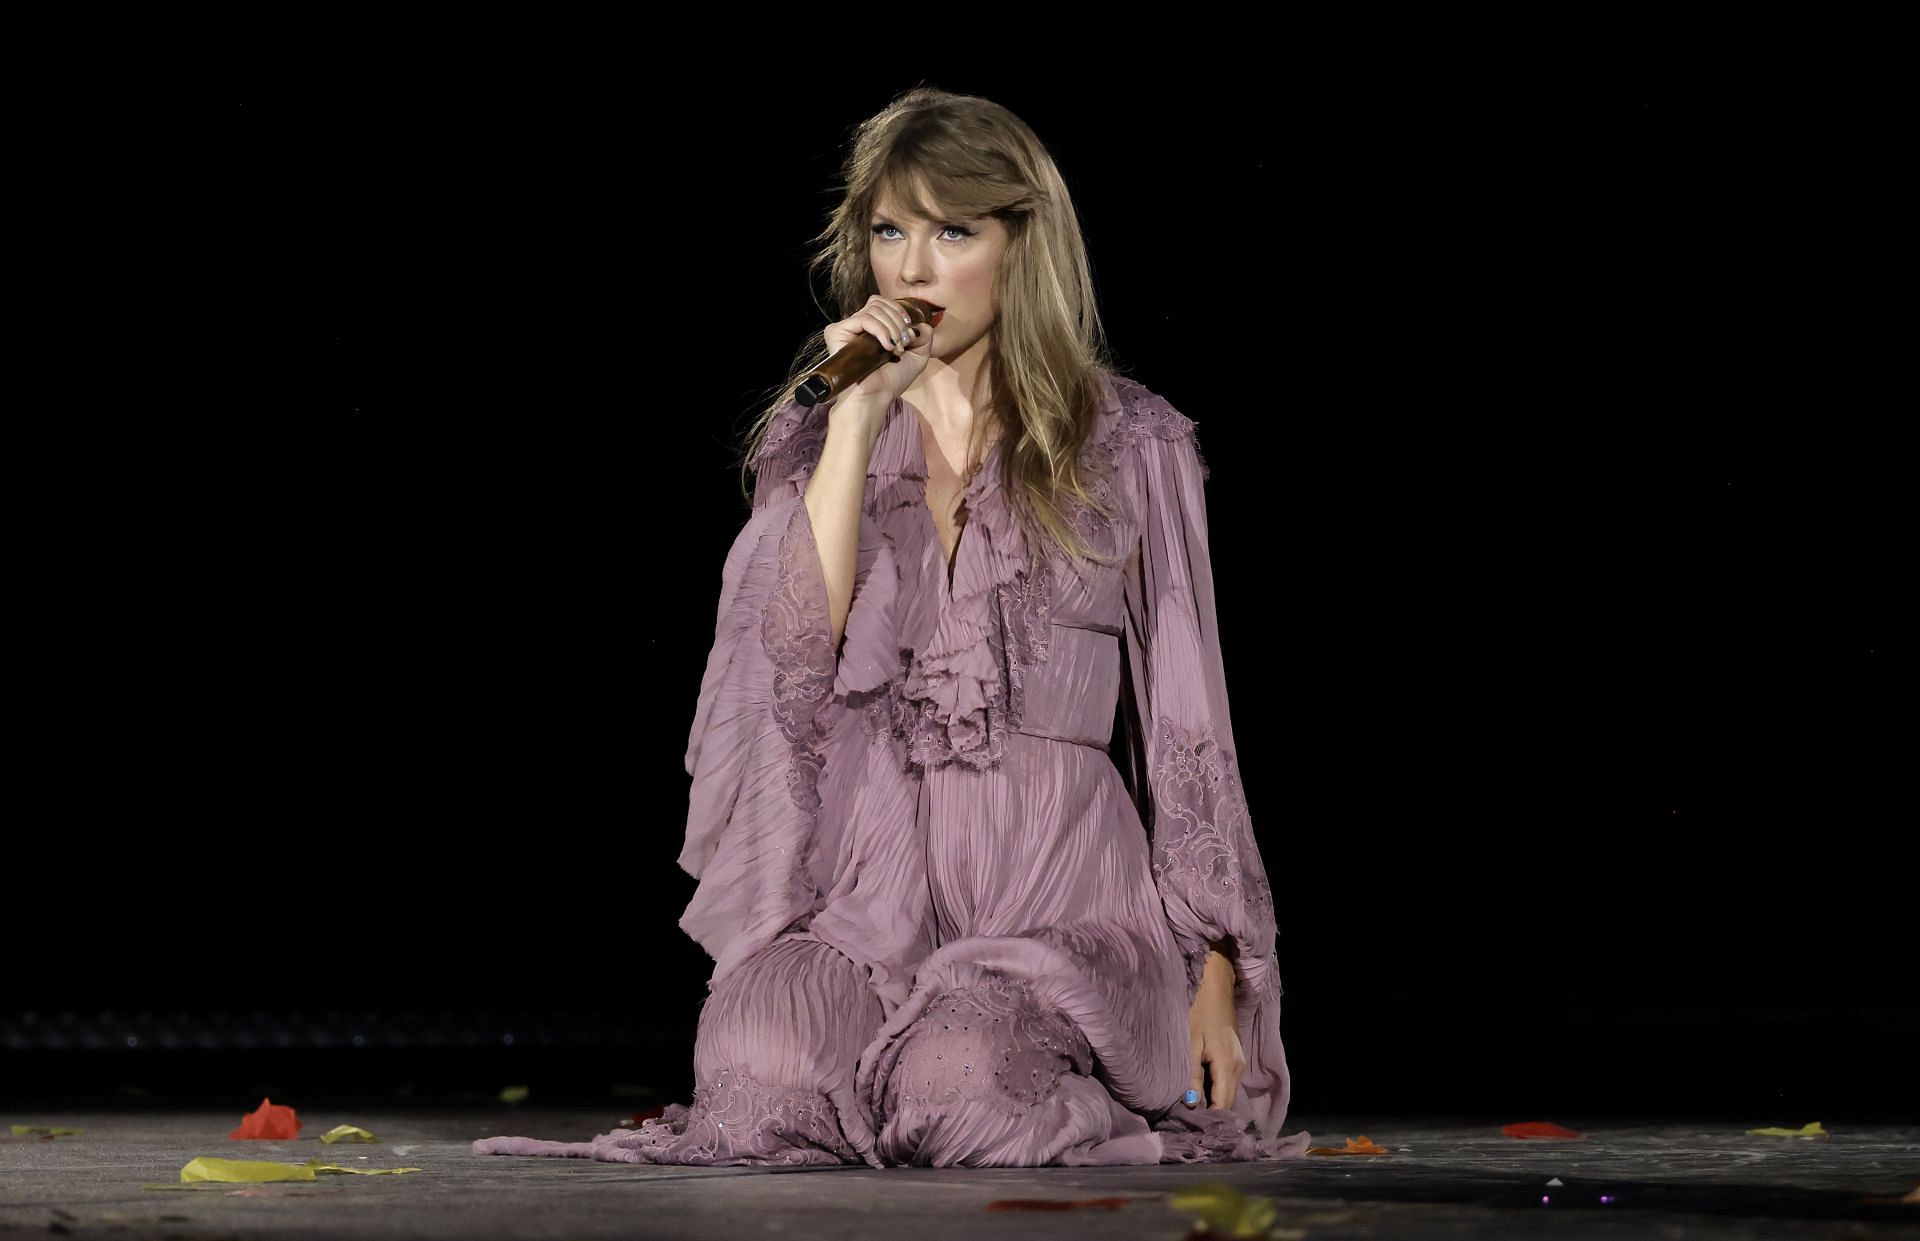 Opening Night of Taylor Swift | The Eras Tour (Photo by Kevin Winter/Getty Images for TAS Rights Management)